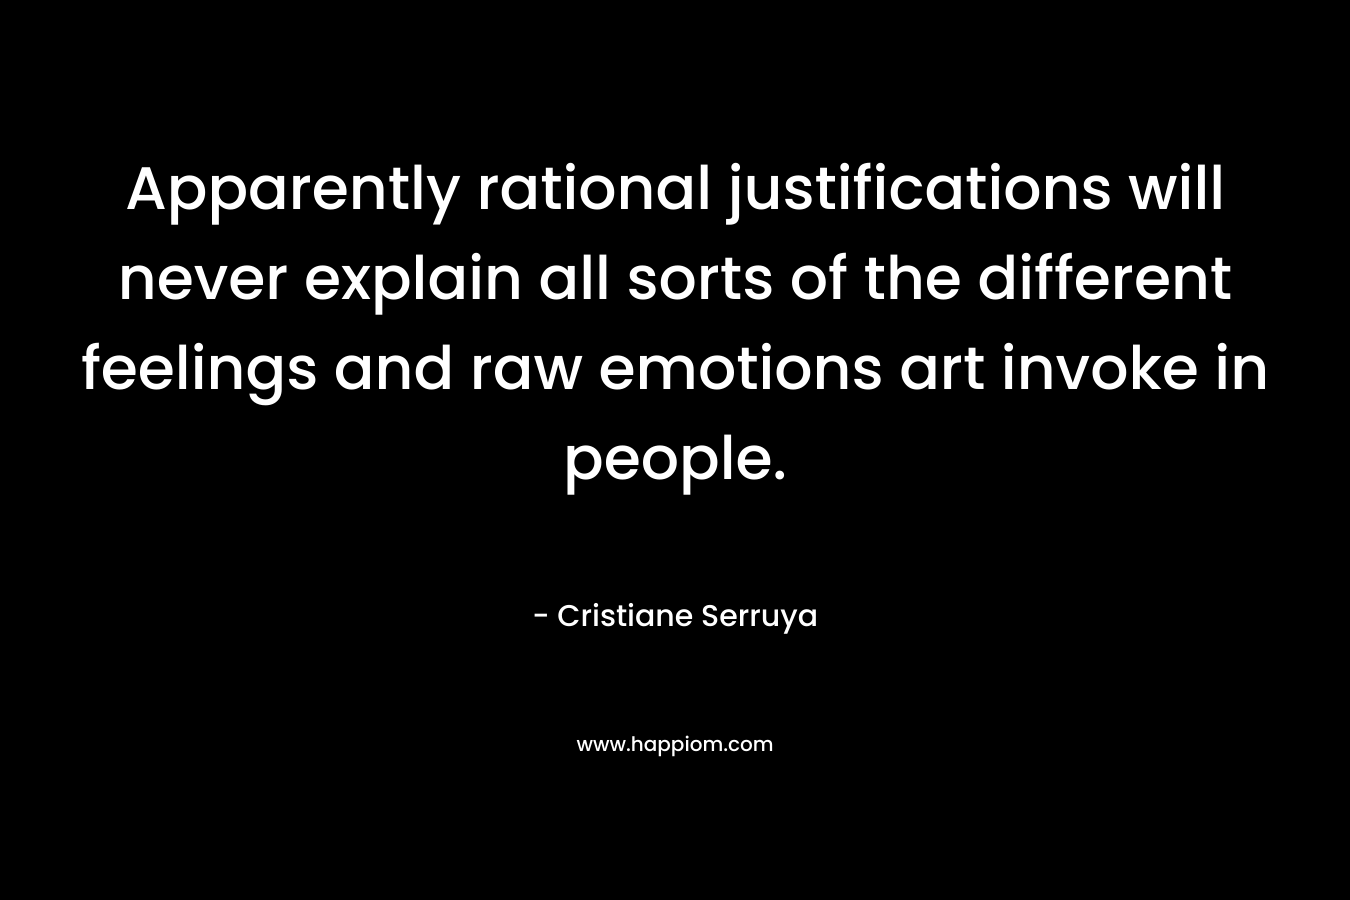 Apparently rational justifications will never explain all sorts of the different feelings and raw emotions art invoke in people.